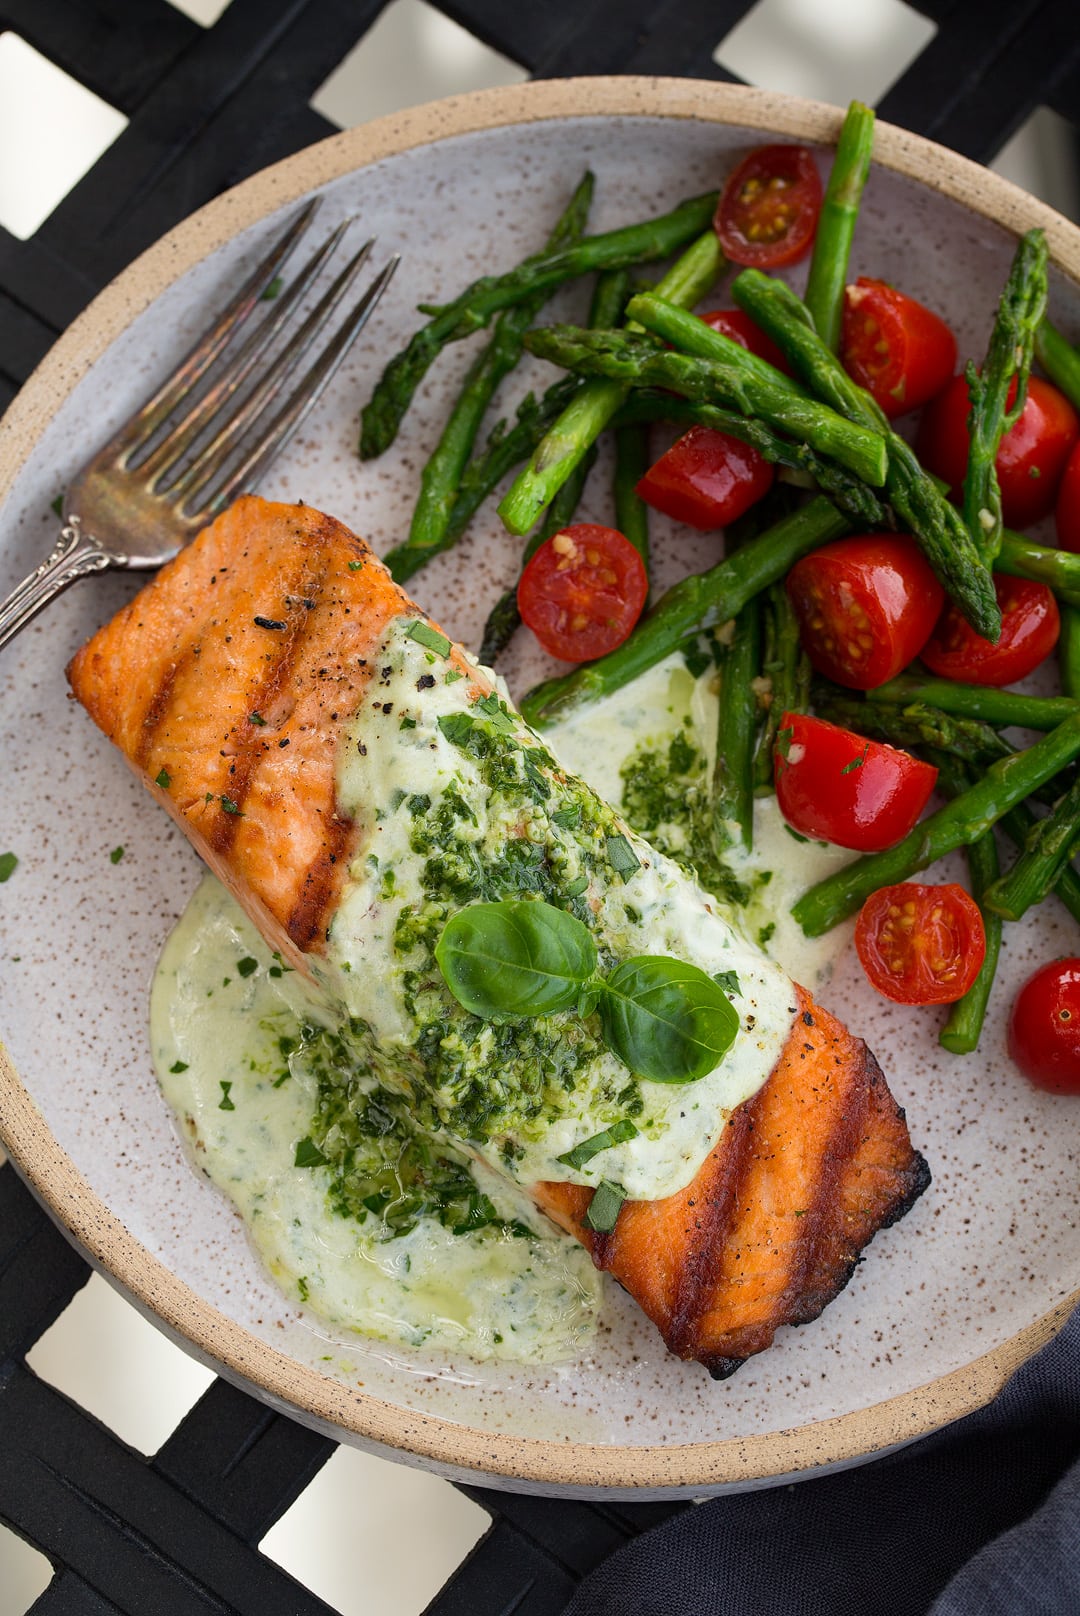 Grilled Salmon fillet with Creamy Pesto sauce on plate with tomatoes and asparagus